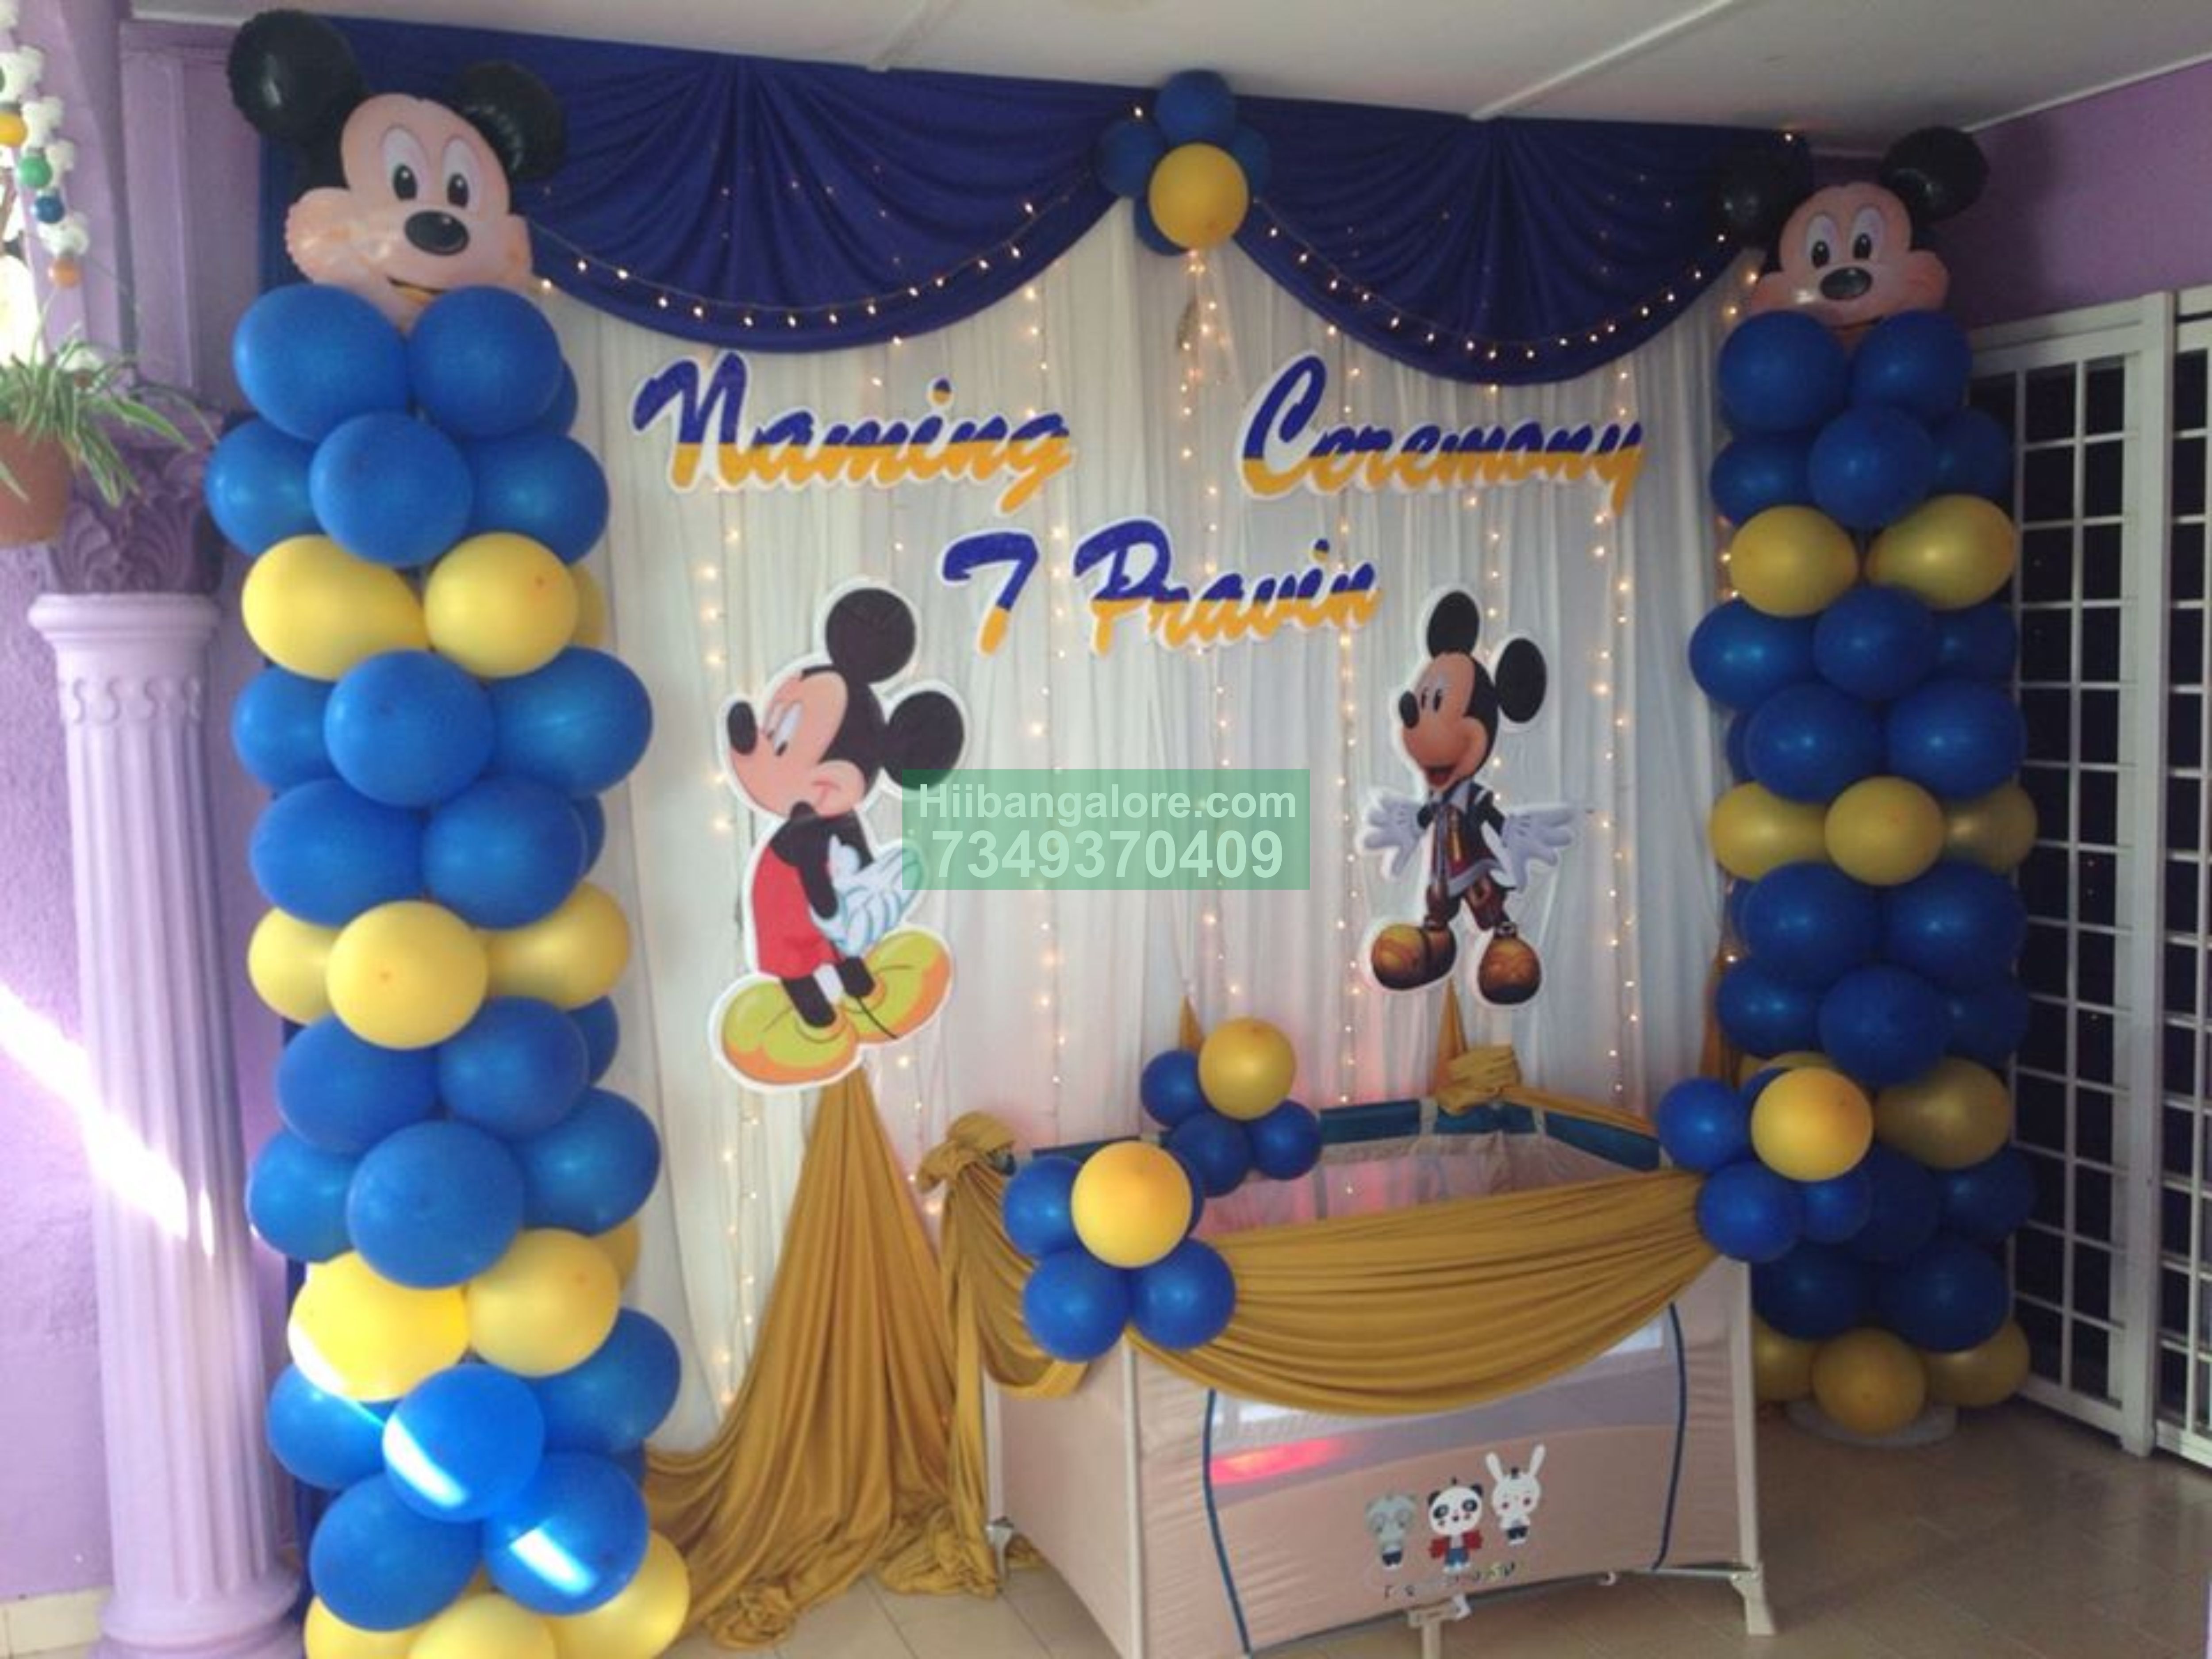 Mickey mouse theme naming ceremony decoration - Catering services in ...